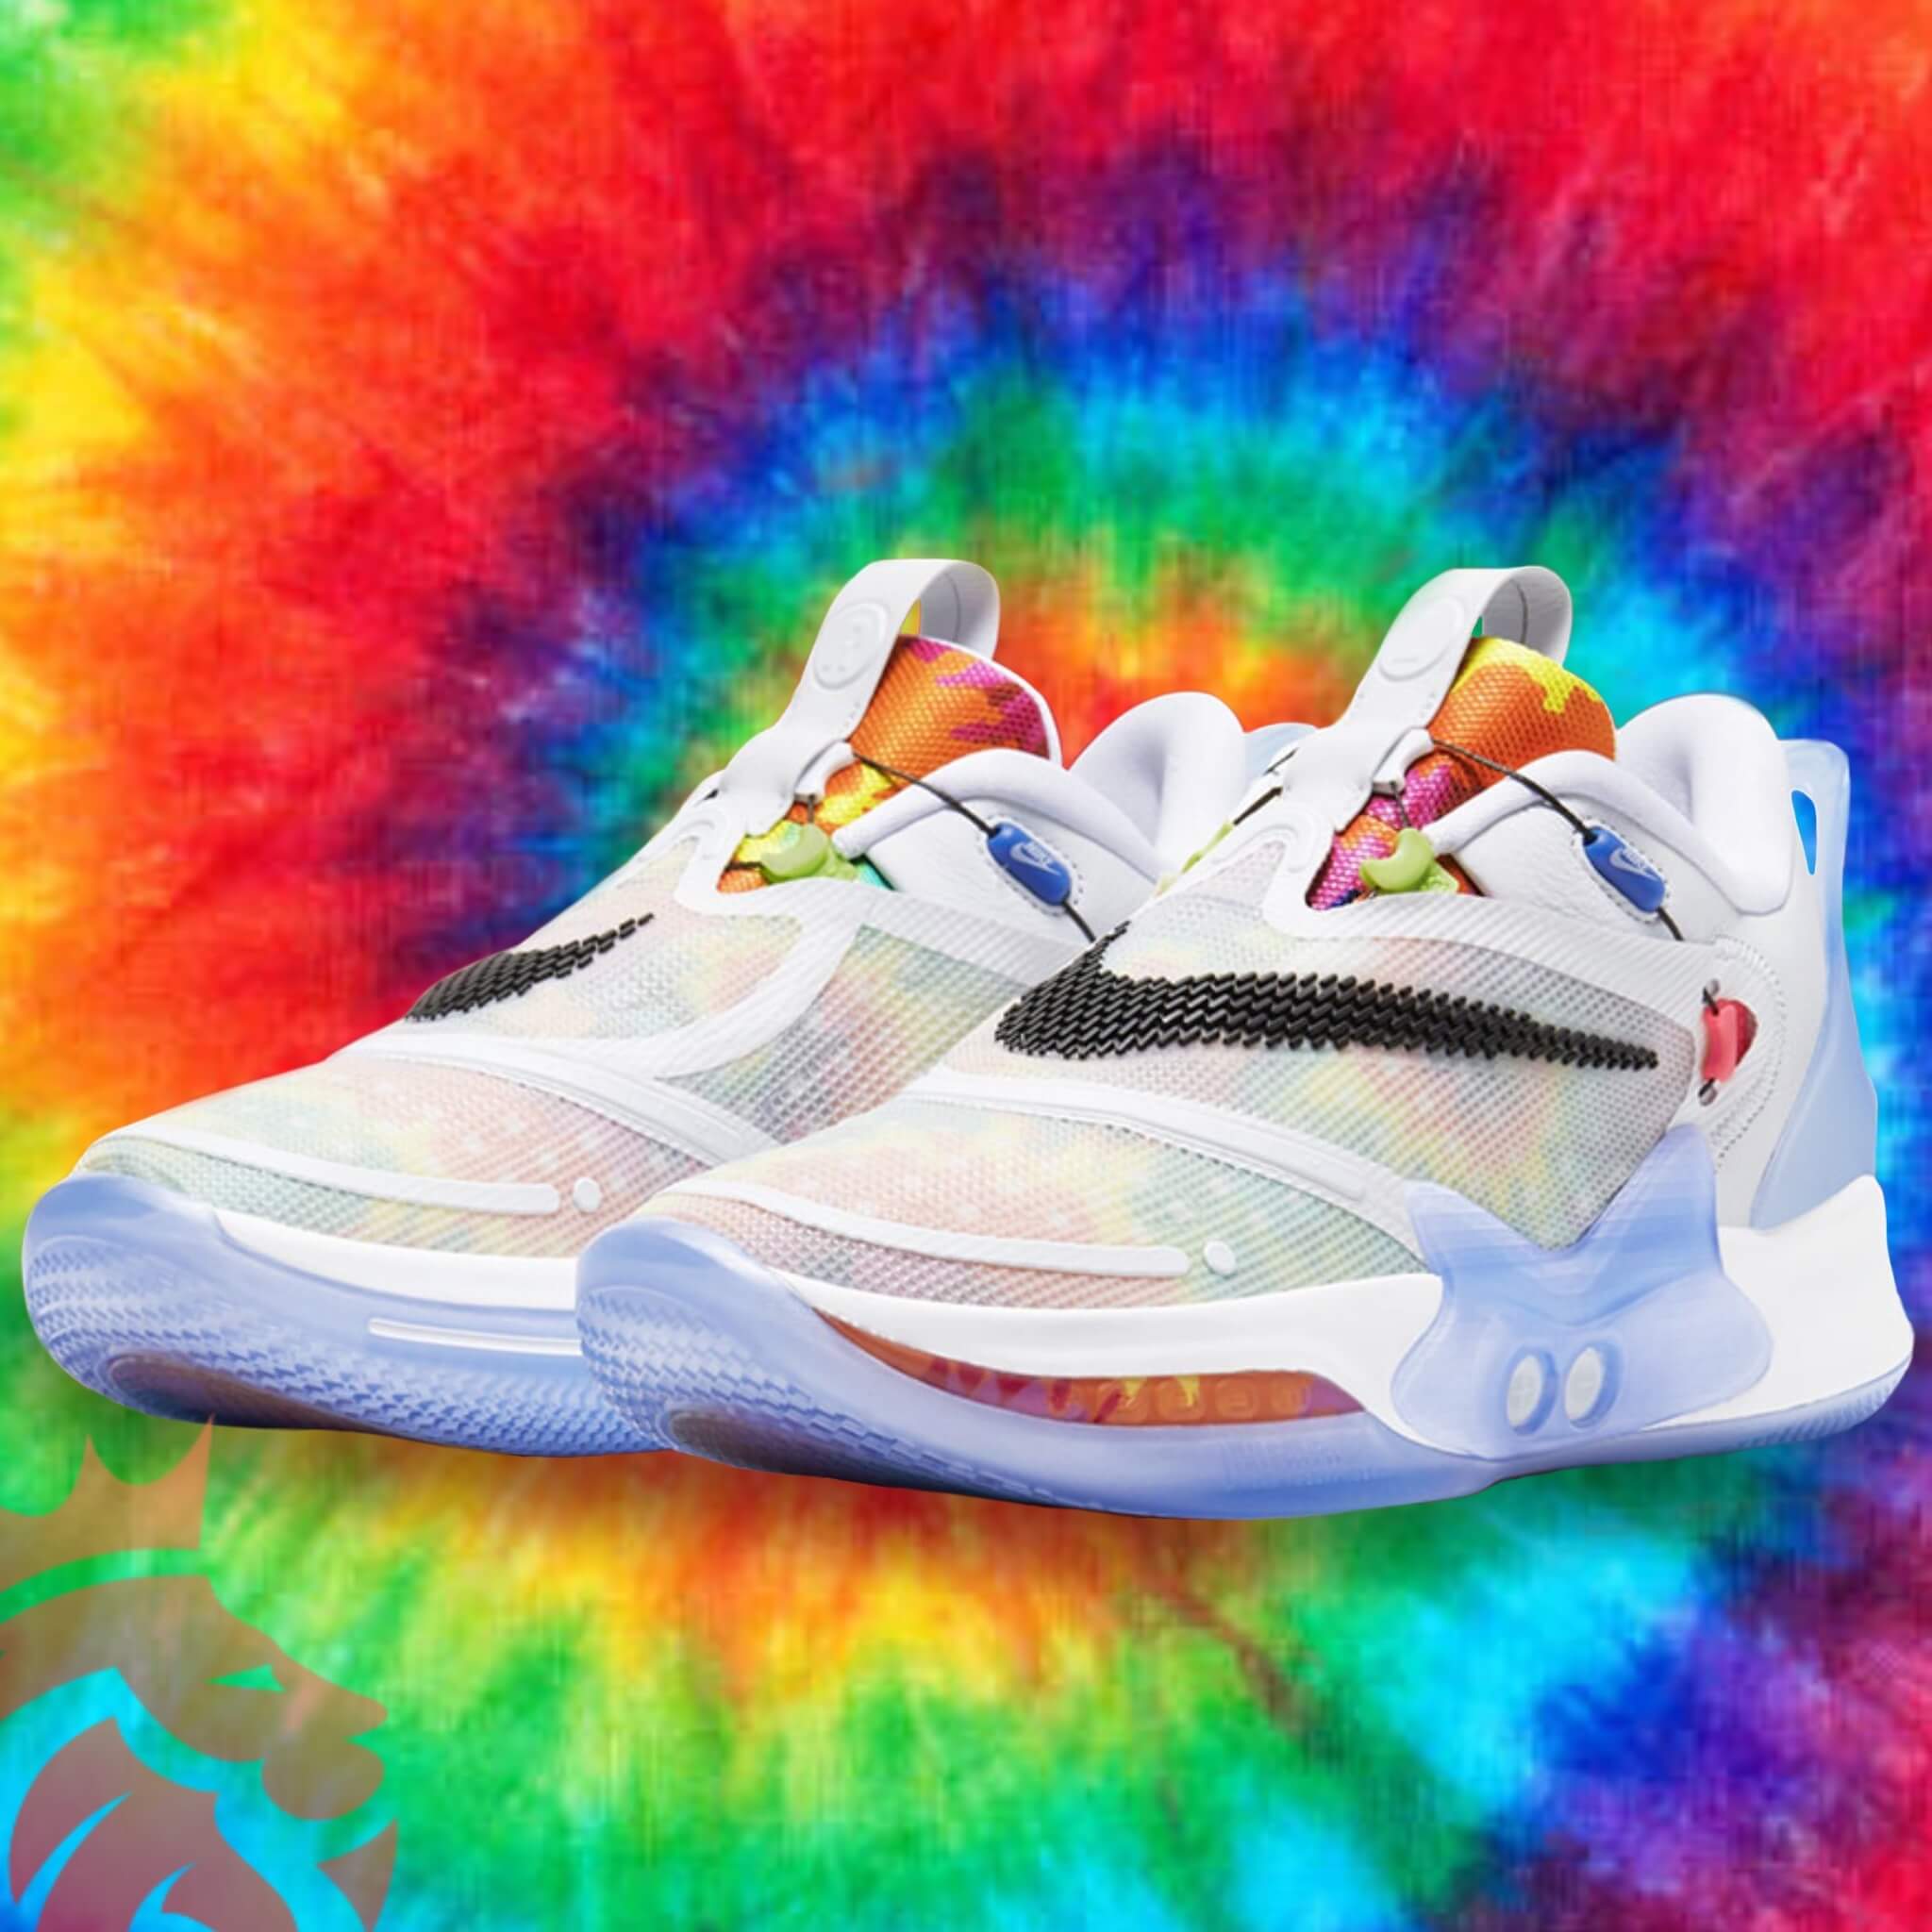 First Look: Nike Adapt BB 2.0 Tie-Dye Dropping This Summer ...